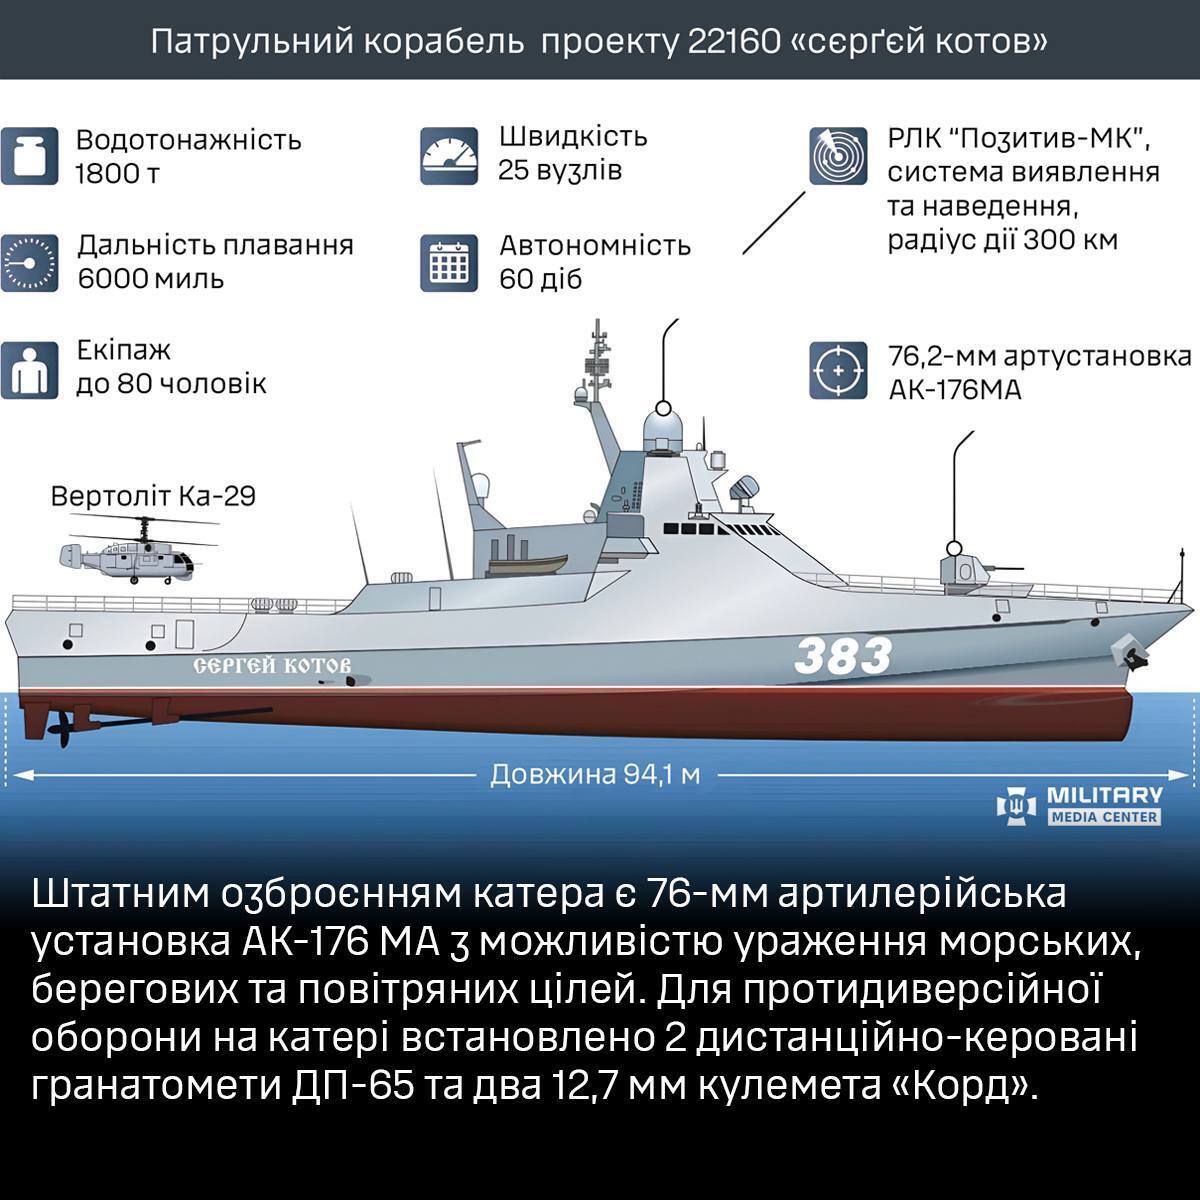 Patrolling for a short time: what is known about the Russian ship ''Sergei Kotov'' sunk in Crimea